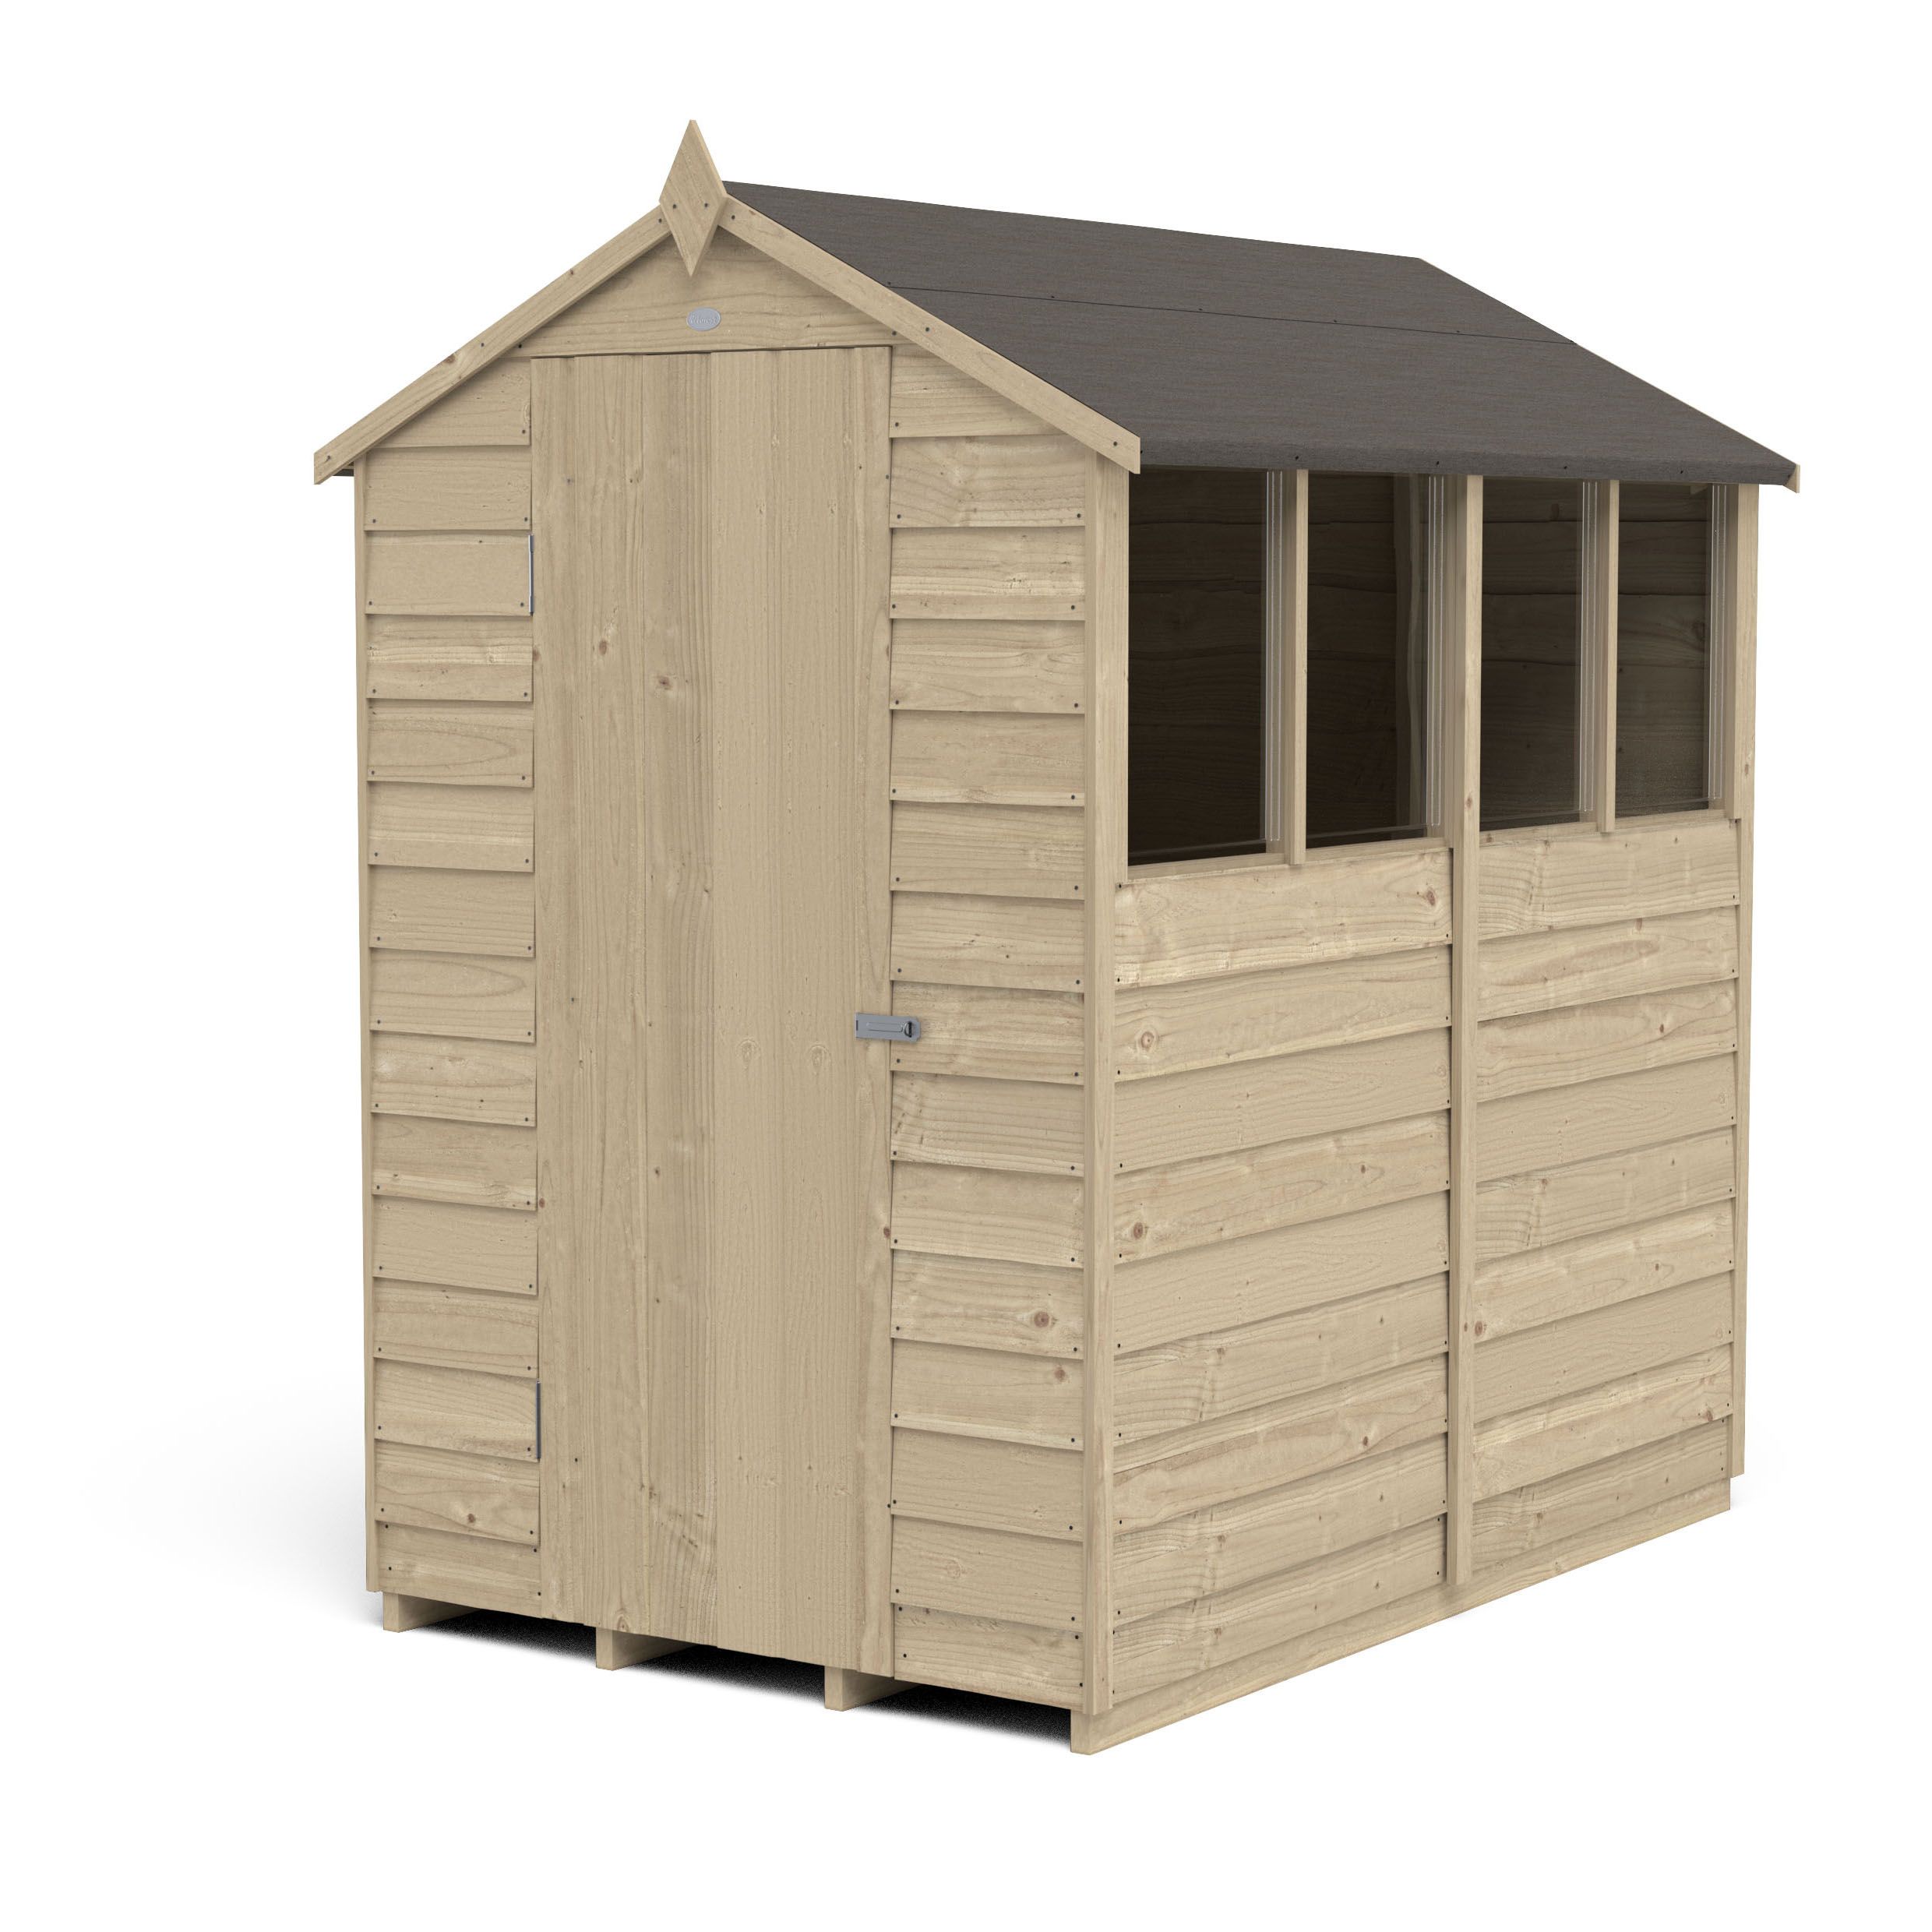 Forest Garden 6x4 ft Apex Wooden Shed with floor & 4 windows